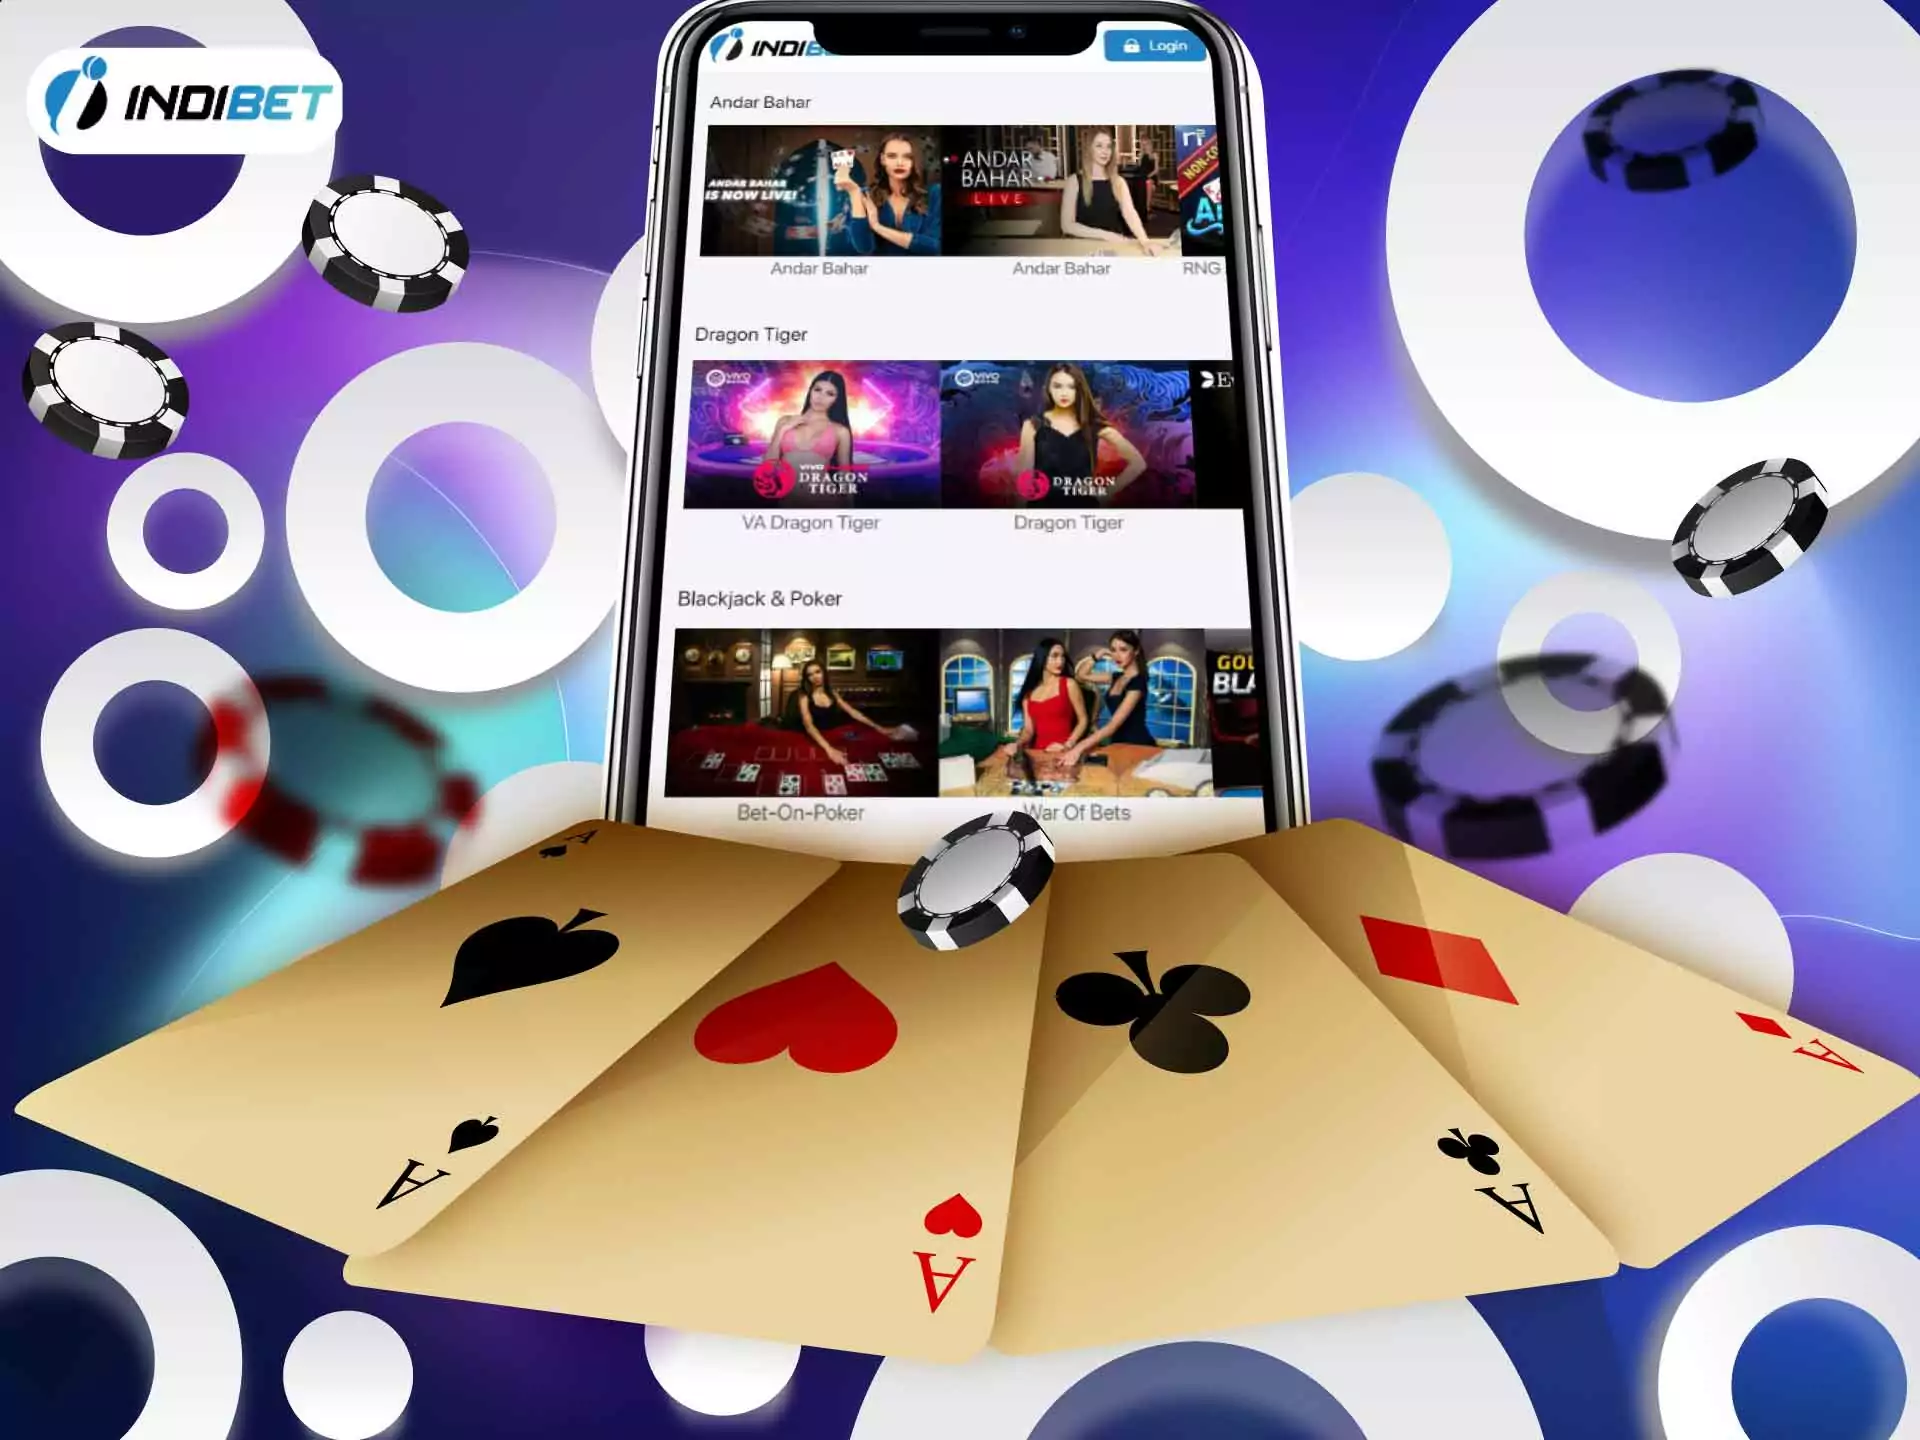 Play traditional games like Andar Bahar in the Indibet casino.